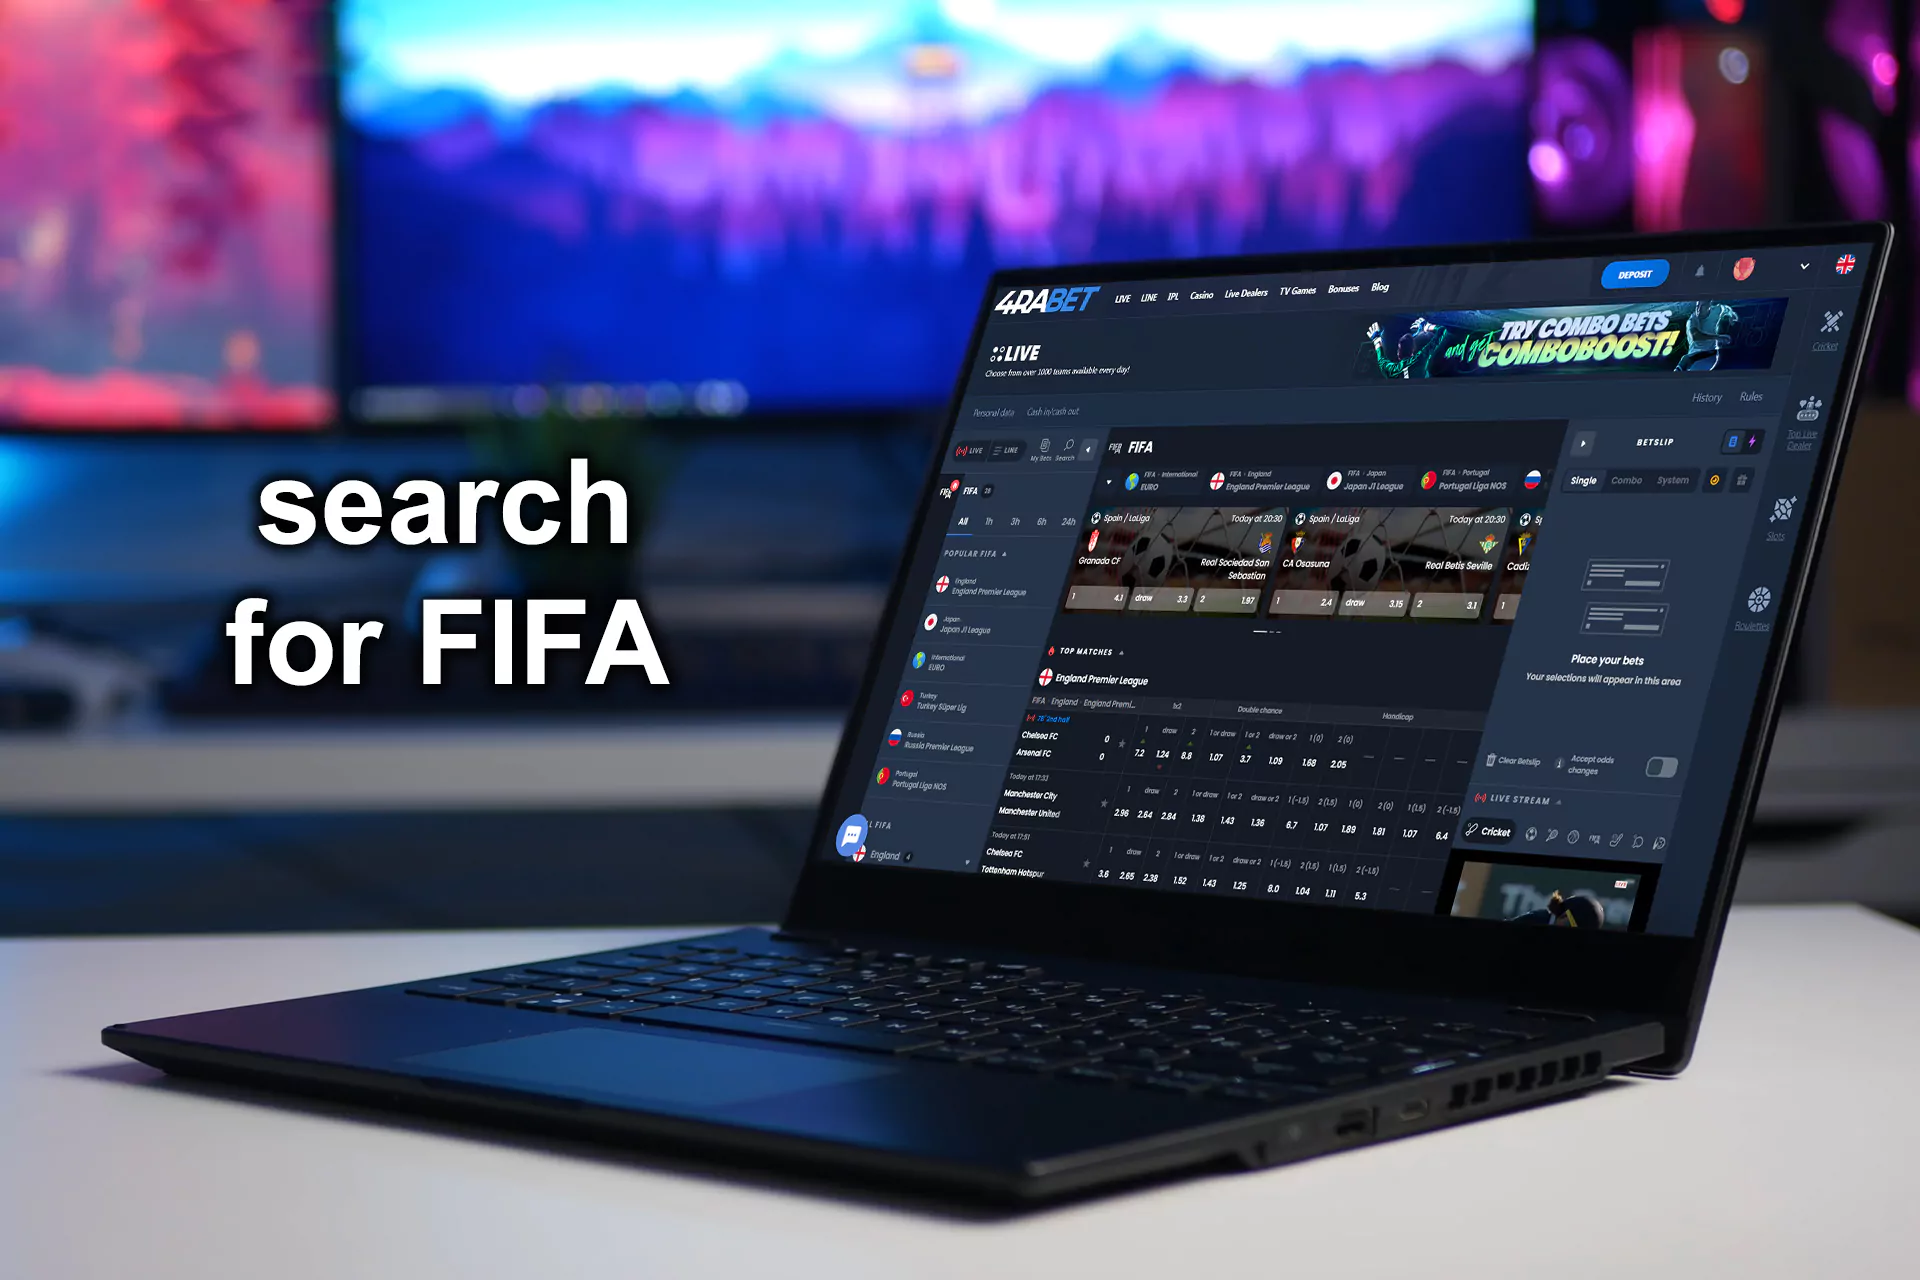 Search for FIFA among disciplines on the site.